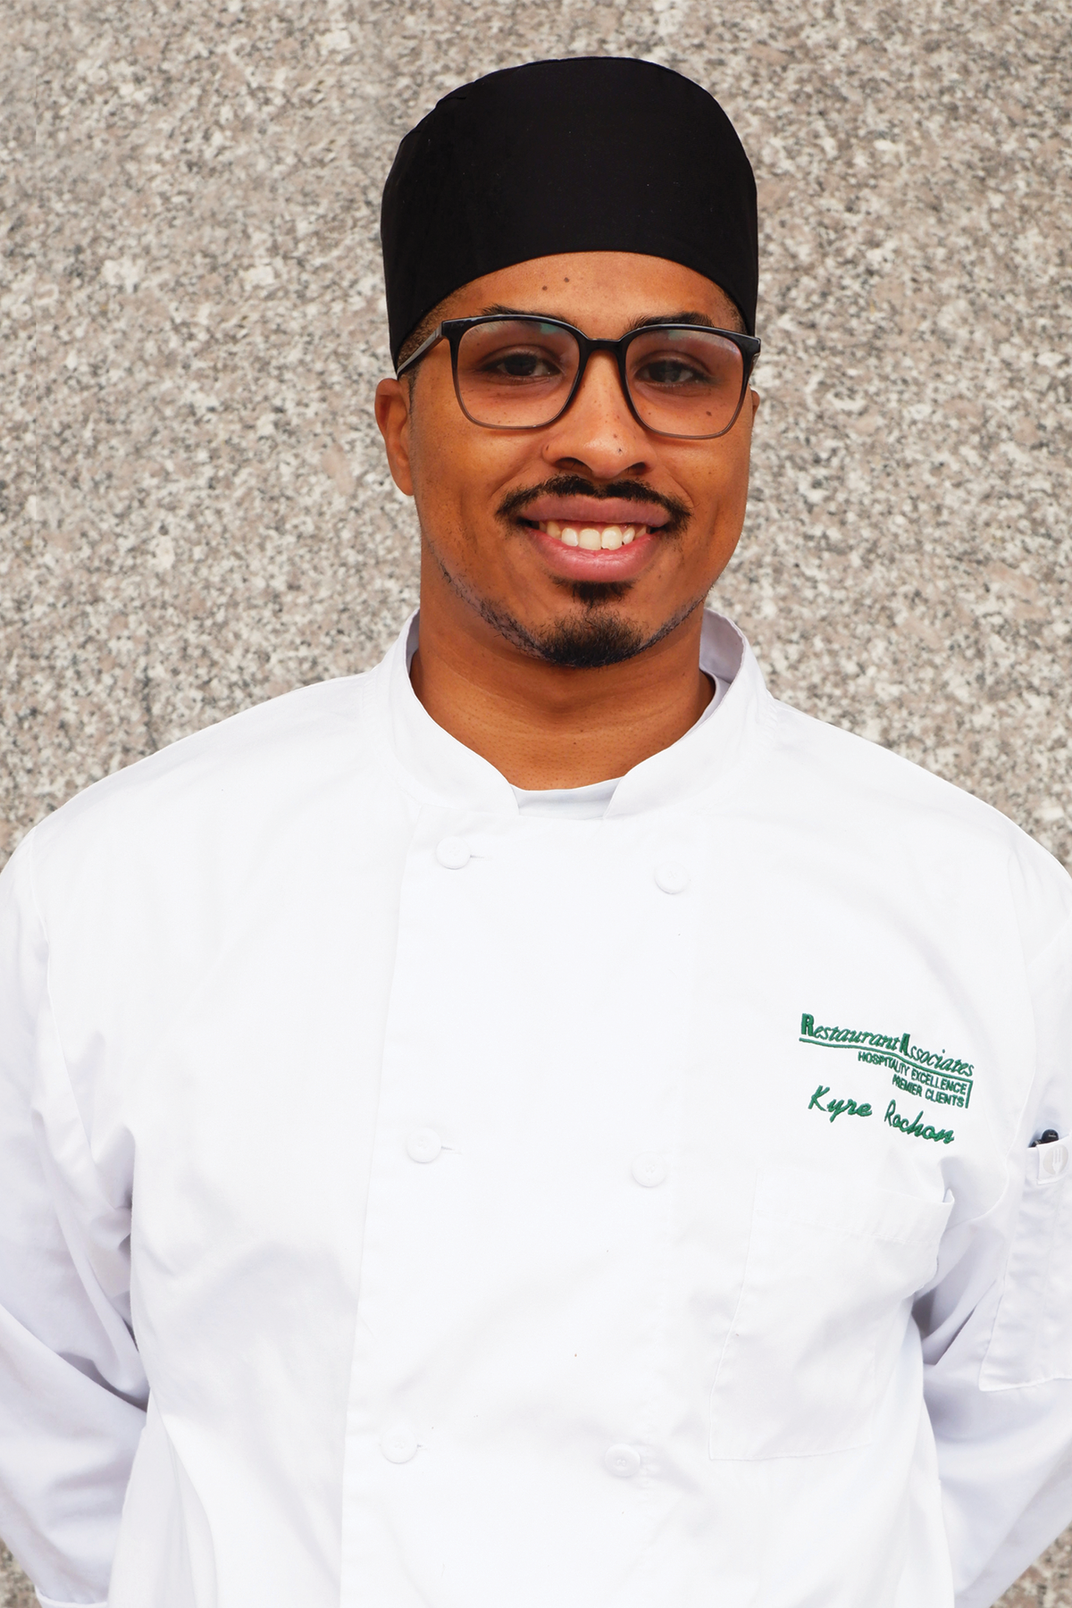 A man dressed in a chef's uniform poses for a portrait